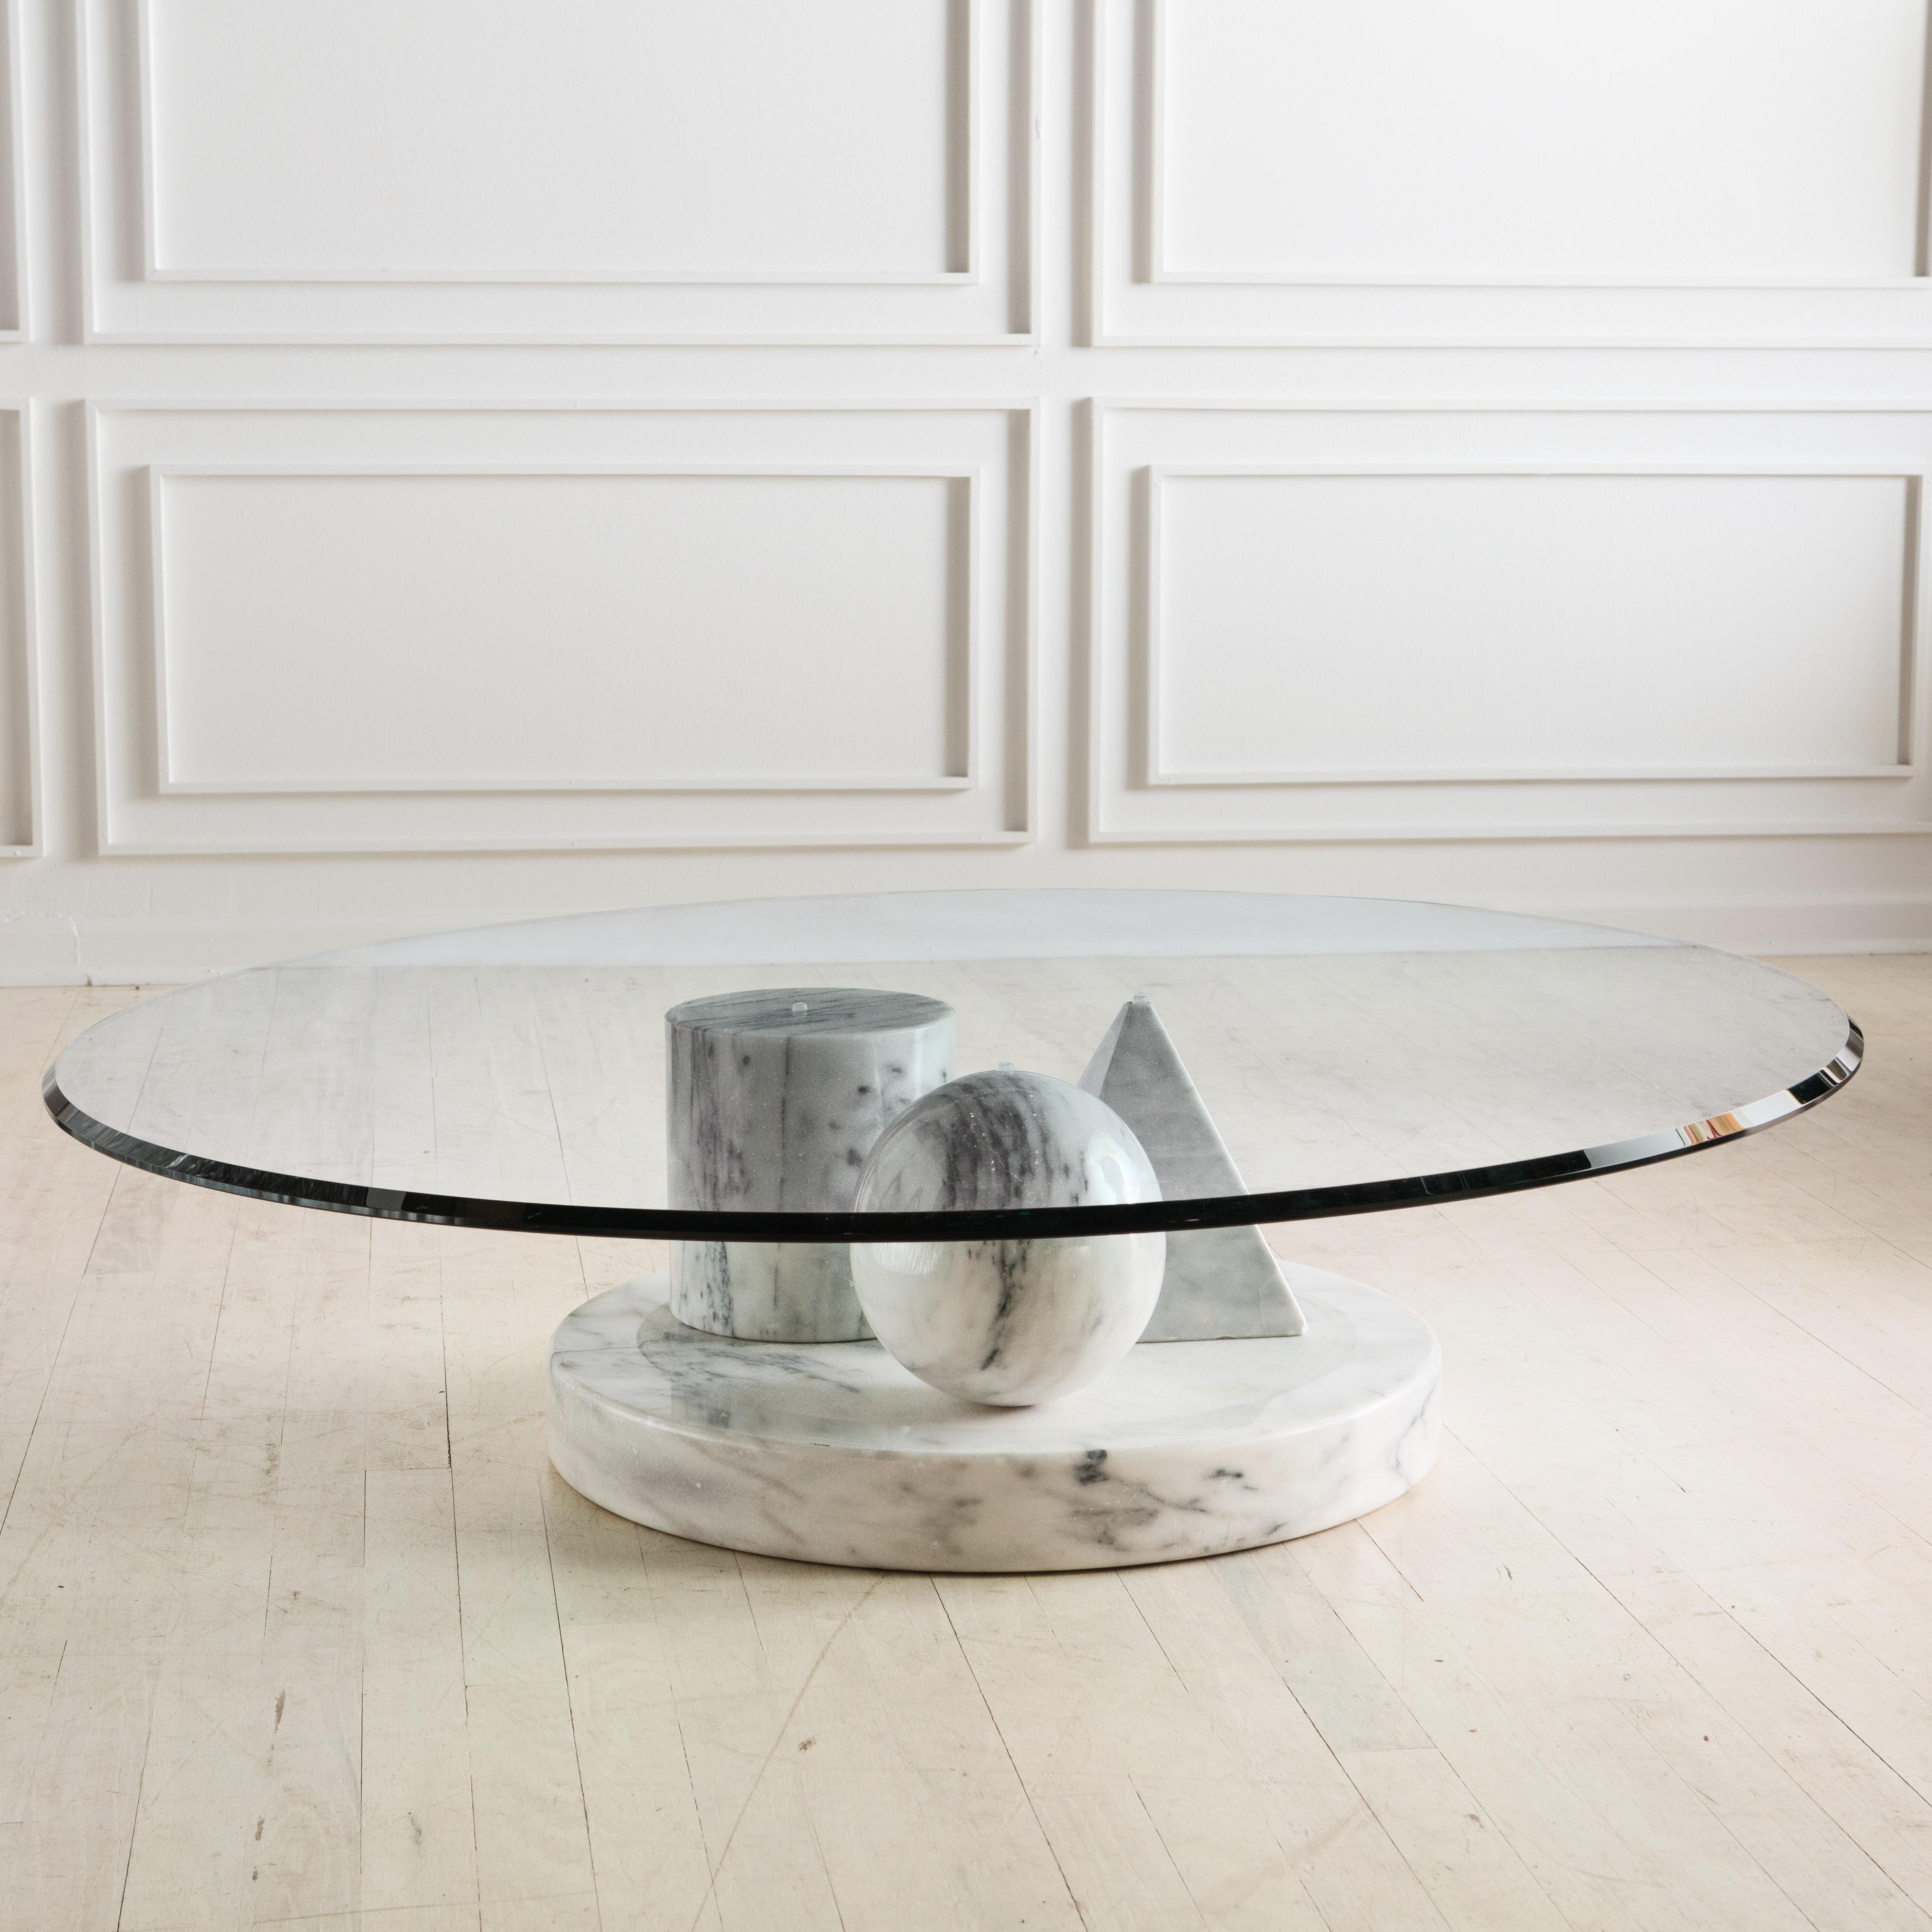 A dynamic use of marble and shapes, this Italian coffee table was designed by Massimo Vignelli for Casigliani. This features a marble triangle, sphere and cone all situated on a 23” thick and 23” diameter marble base on which a thick clear glass top